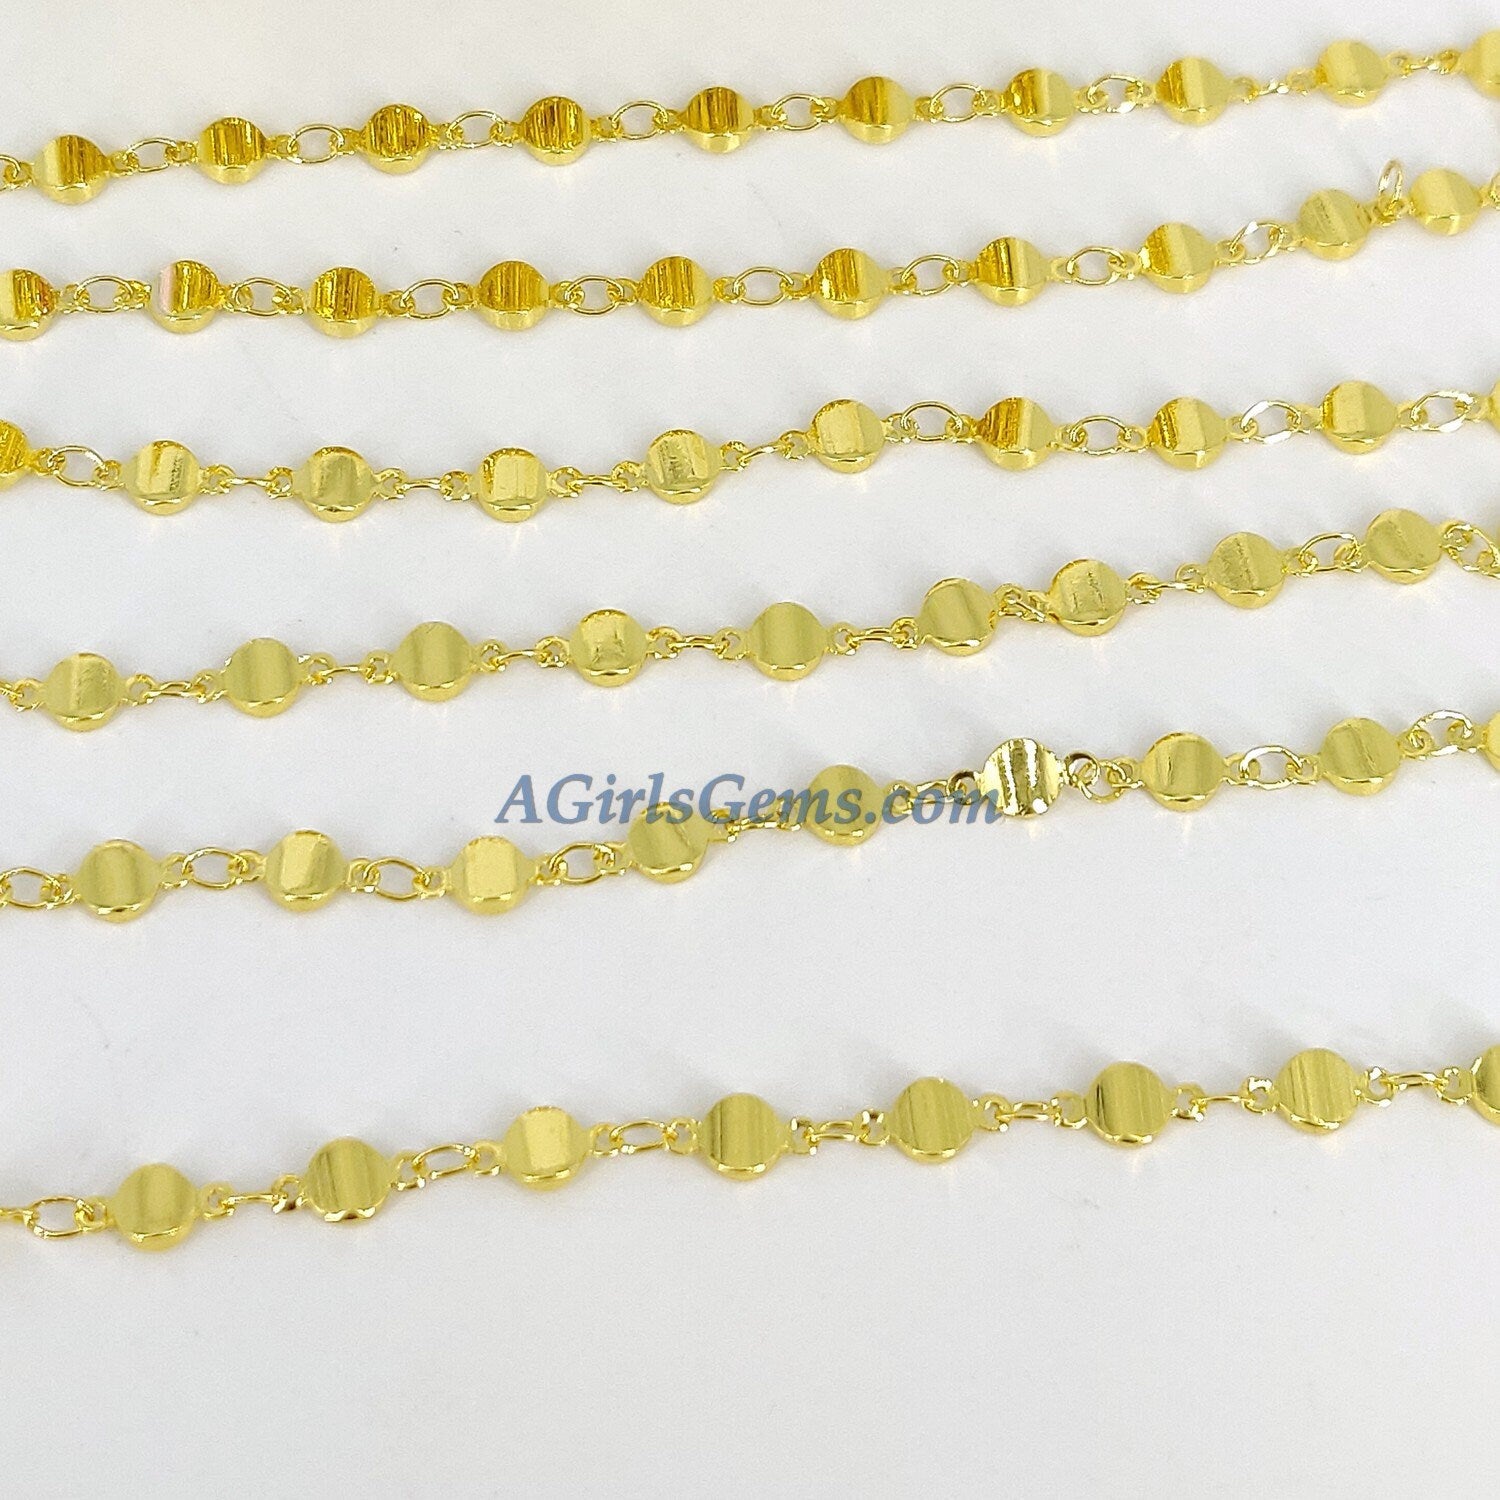 Silver Beaded Rosary Chain, Jewelry 4 mm Oblong Oval Metal Beaded Flat Moroccan Style Beads CH #228, Soldered Links Gold/Silver Plated